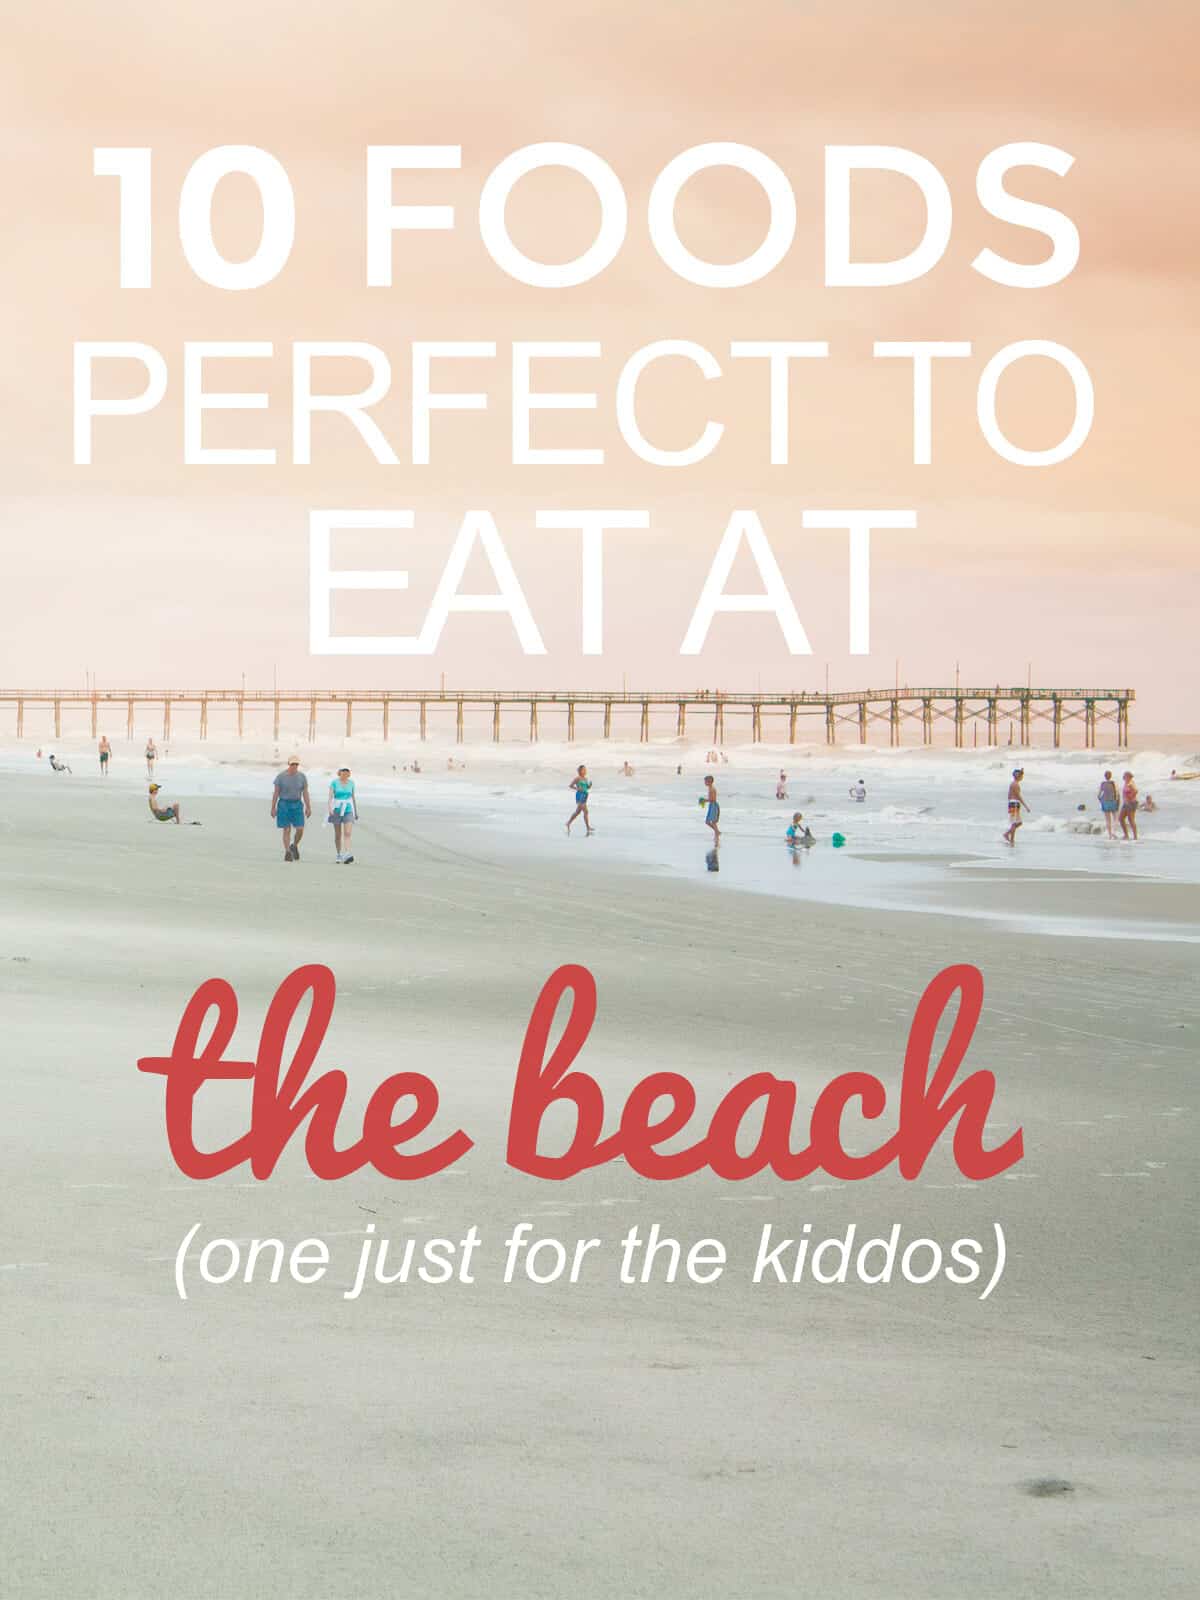 Ten Foods that are Perfect to Eat at the Beach: Here's a line up of all the things I look forward to eating at the beach during vacation! YUM! | macheesmo.com